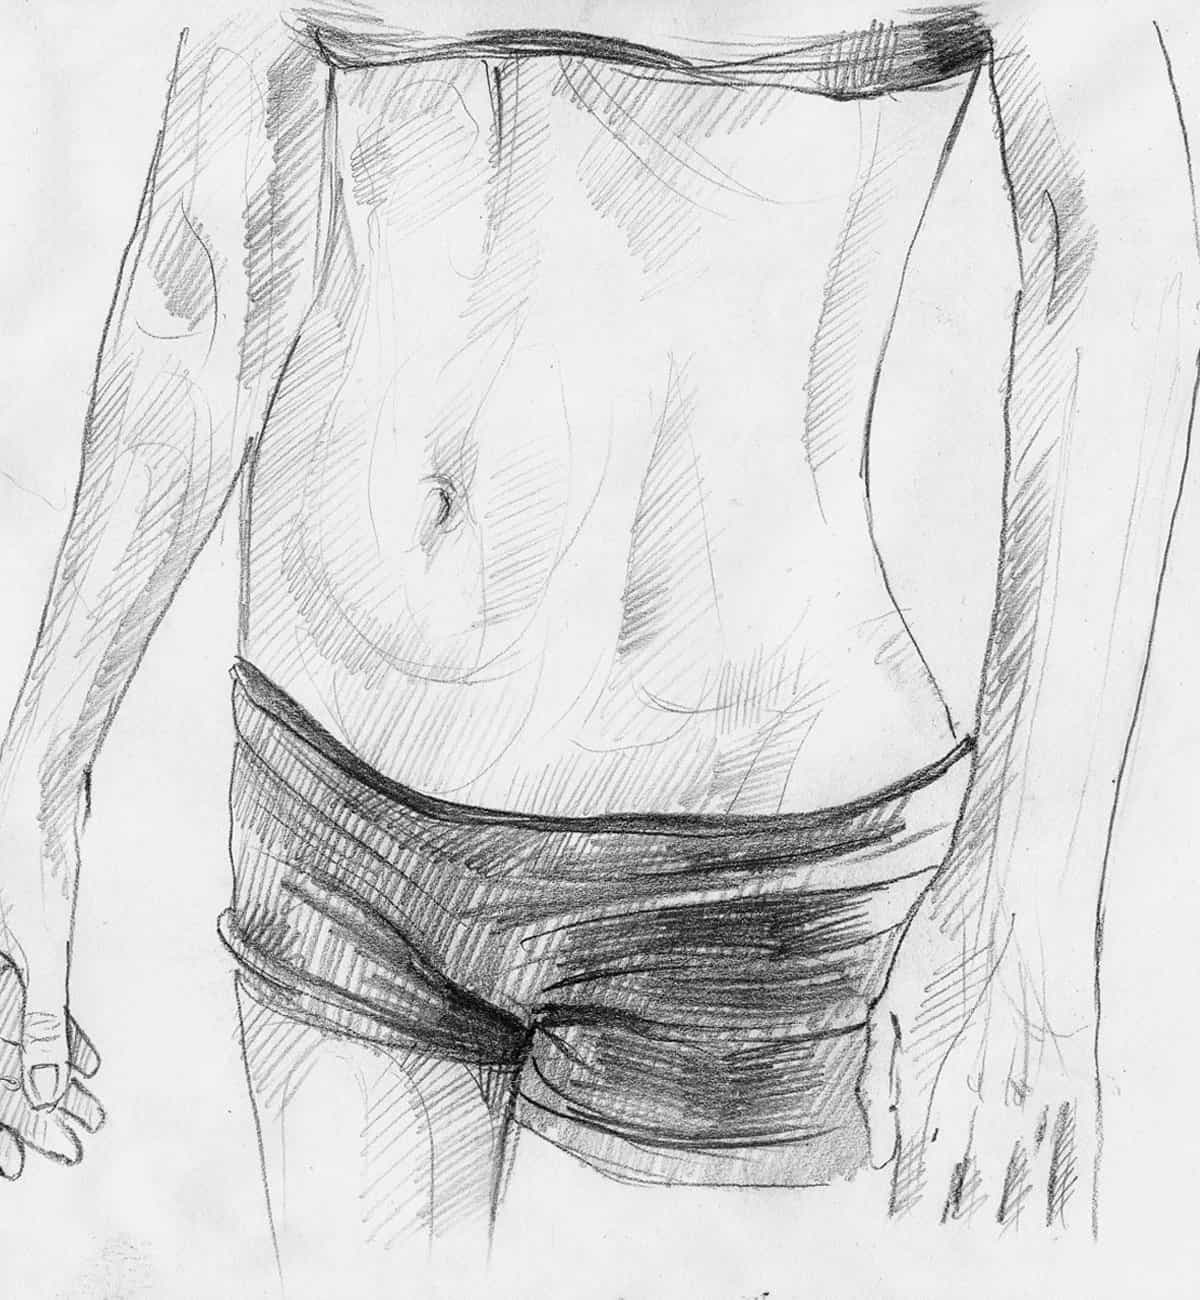 Pencil sketch of woman's toned mid-section